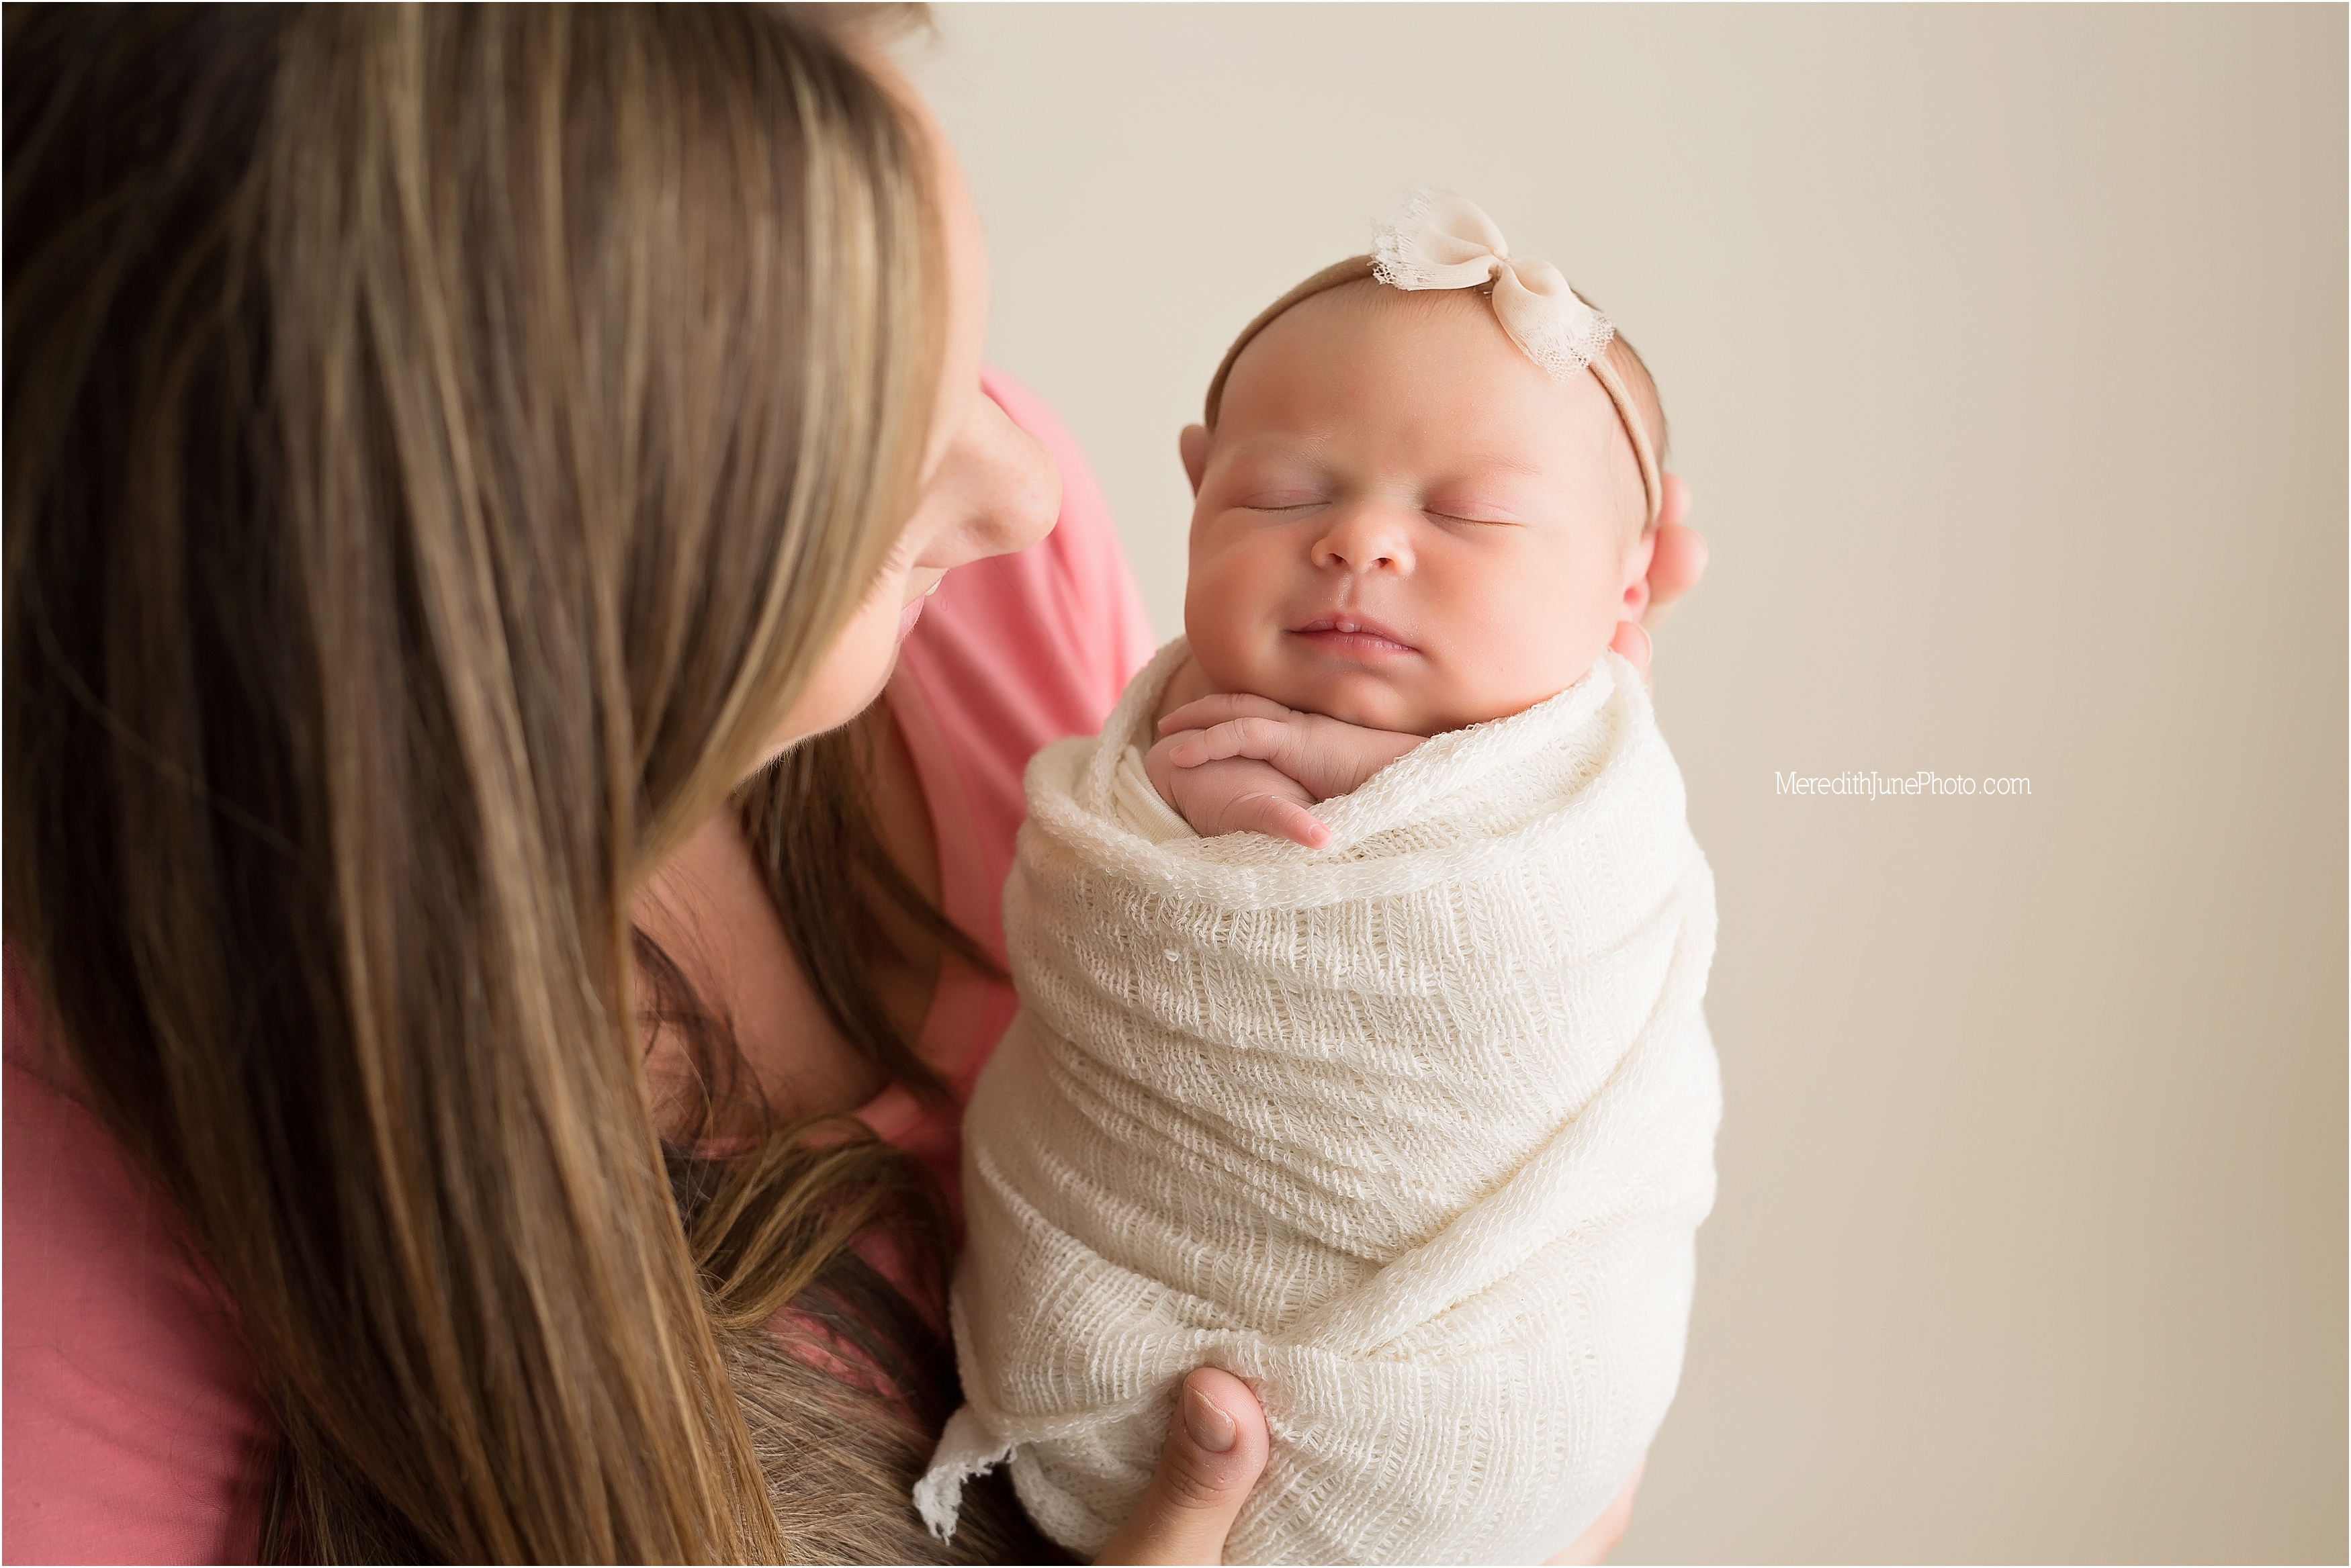 Reagan's newborn session at Meredith June Photography 